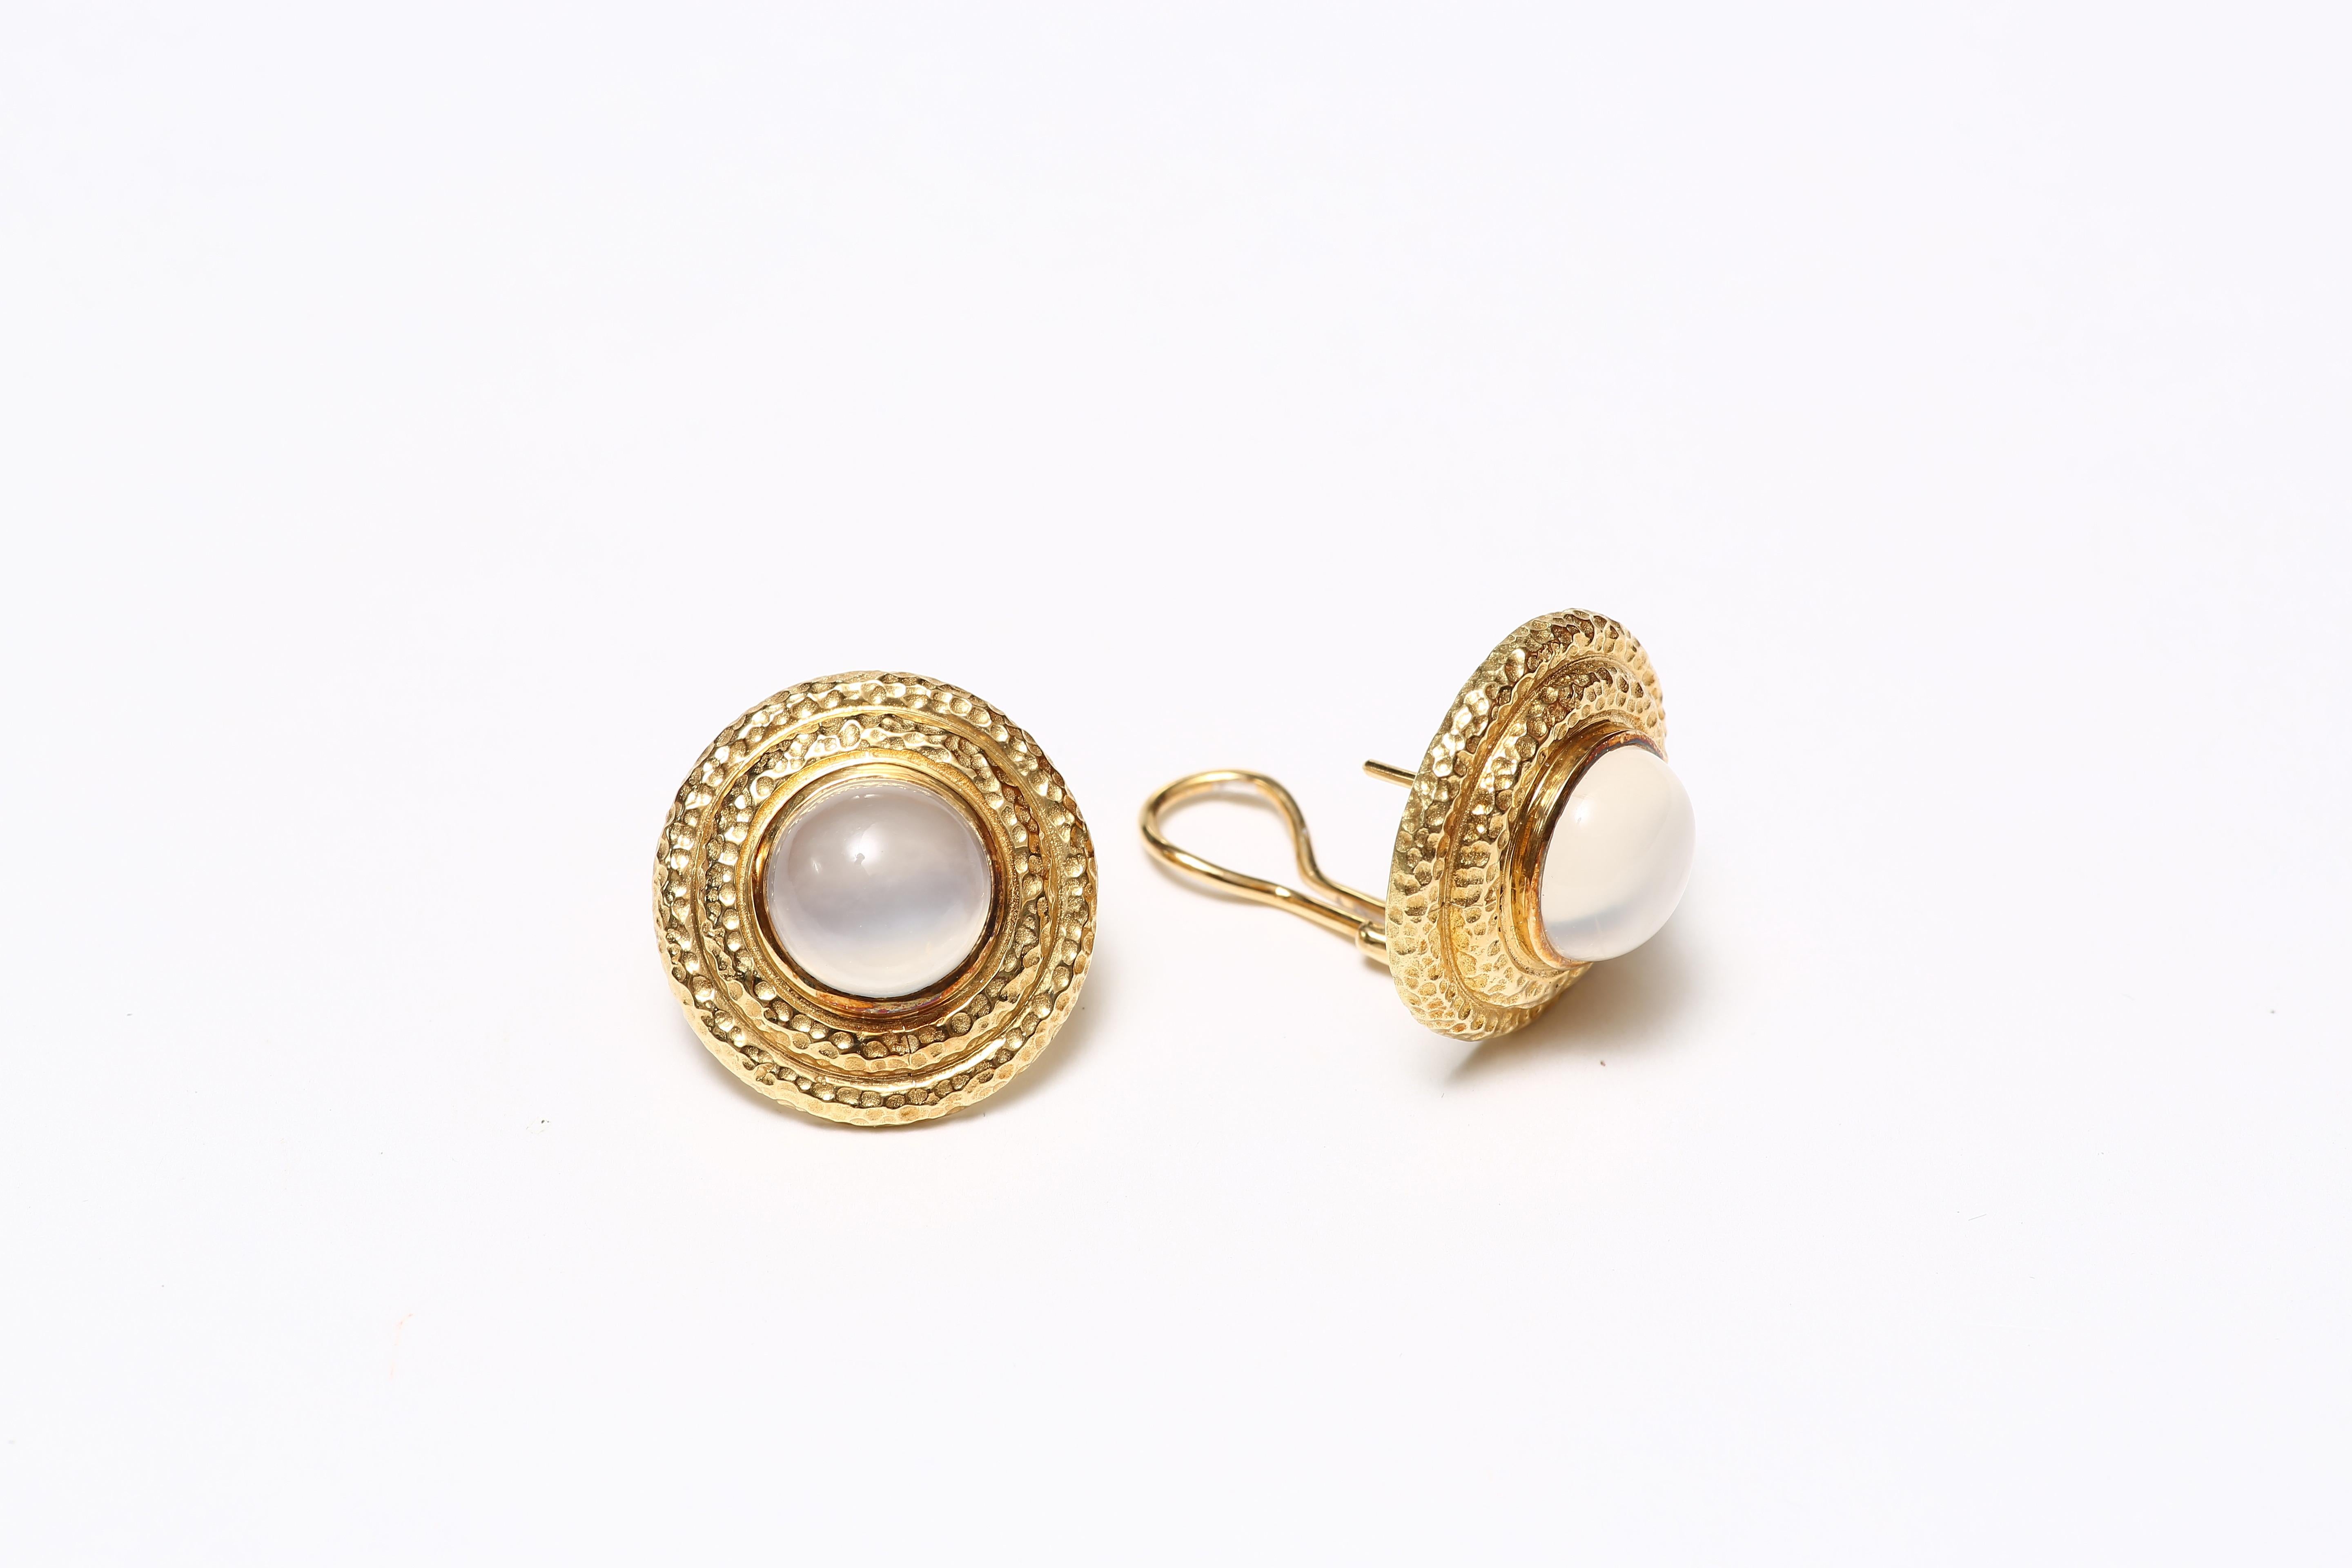 The earrings with round cabochon moonstones set in hand-hammered 18K gold stepped frames. The back posts & clips in solid 18 karat gold.

Designed by AMANDA CLARK for Altfield, our collection focuses on natures most lovely materials such as pearls,